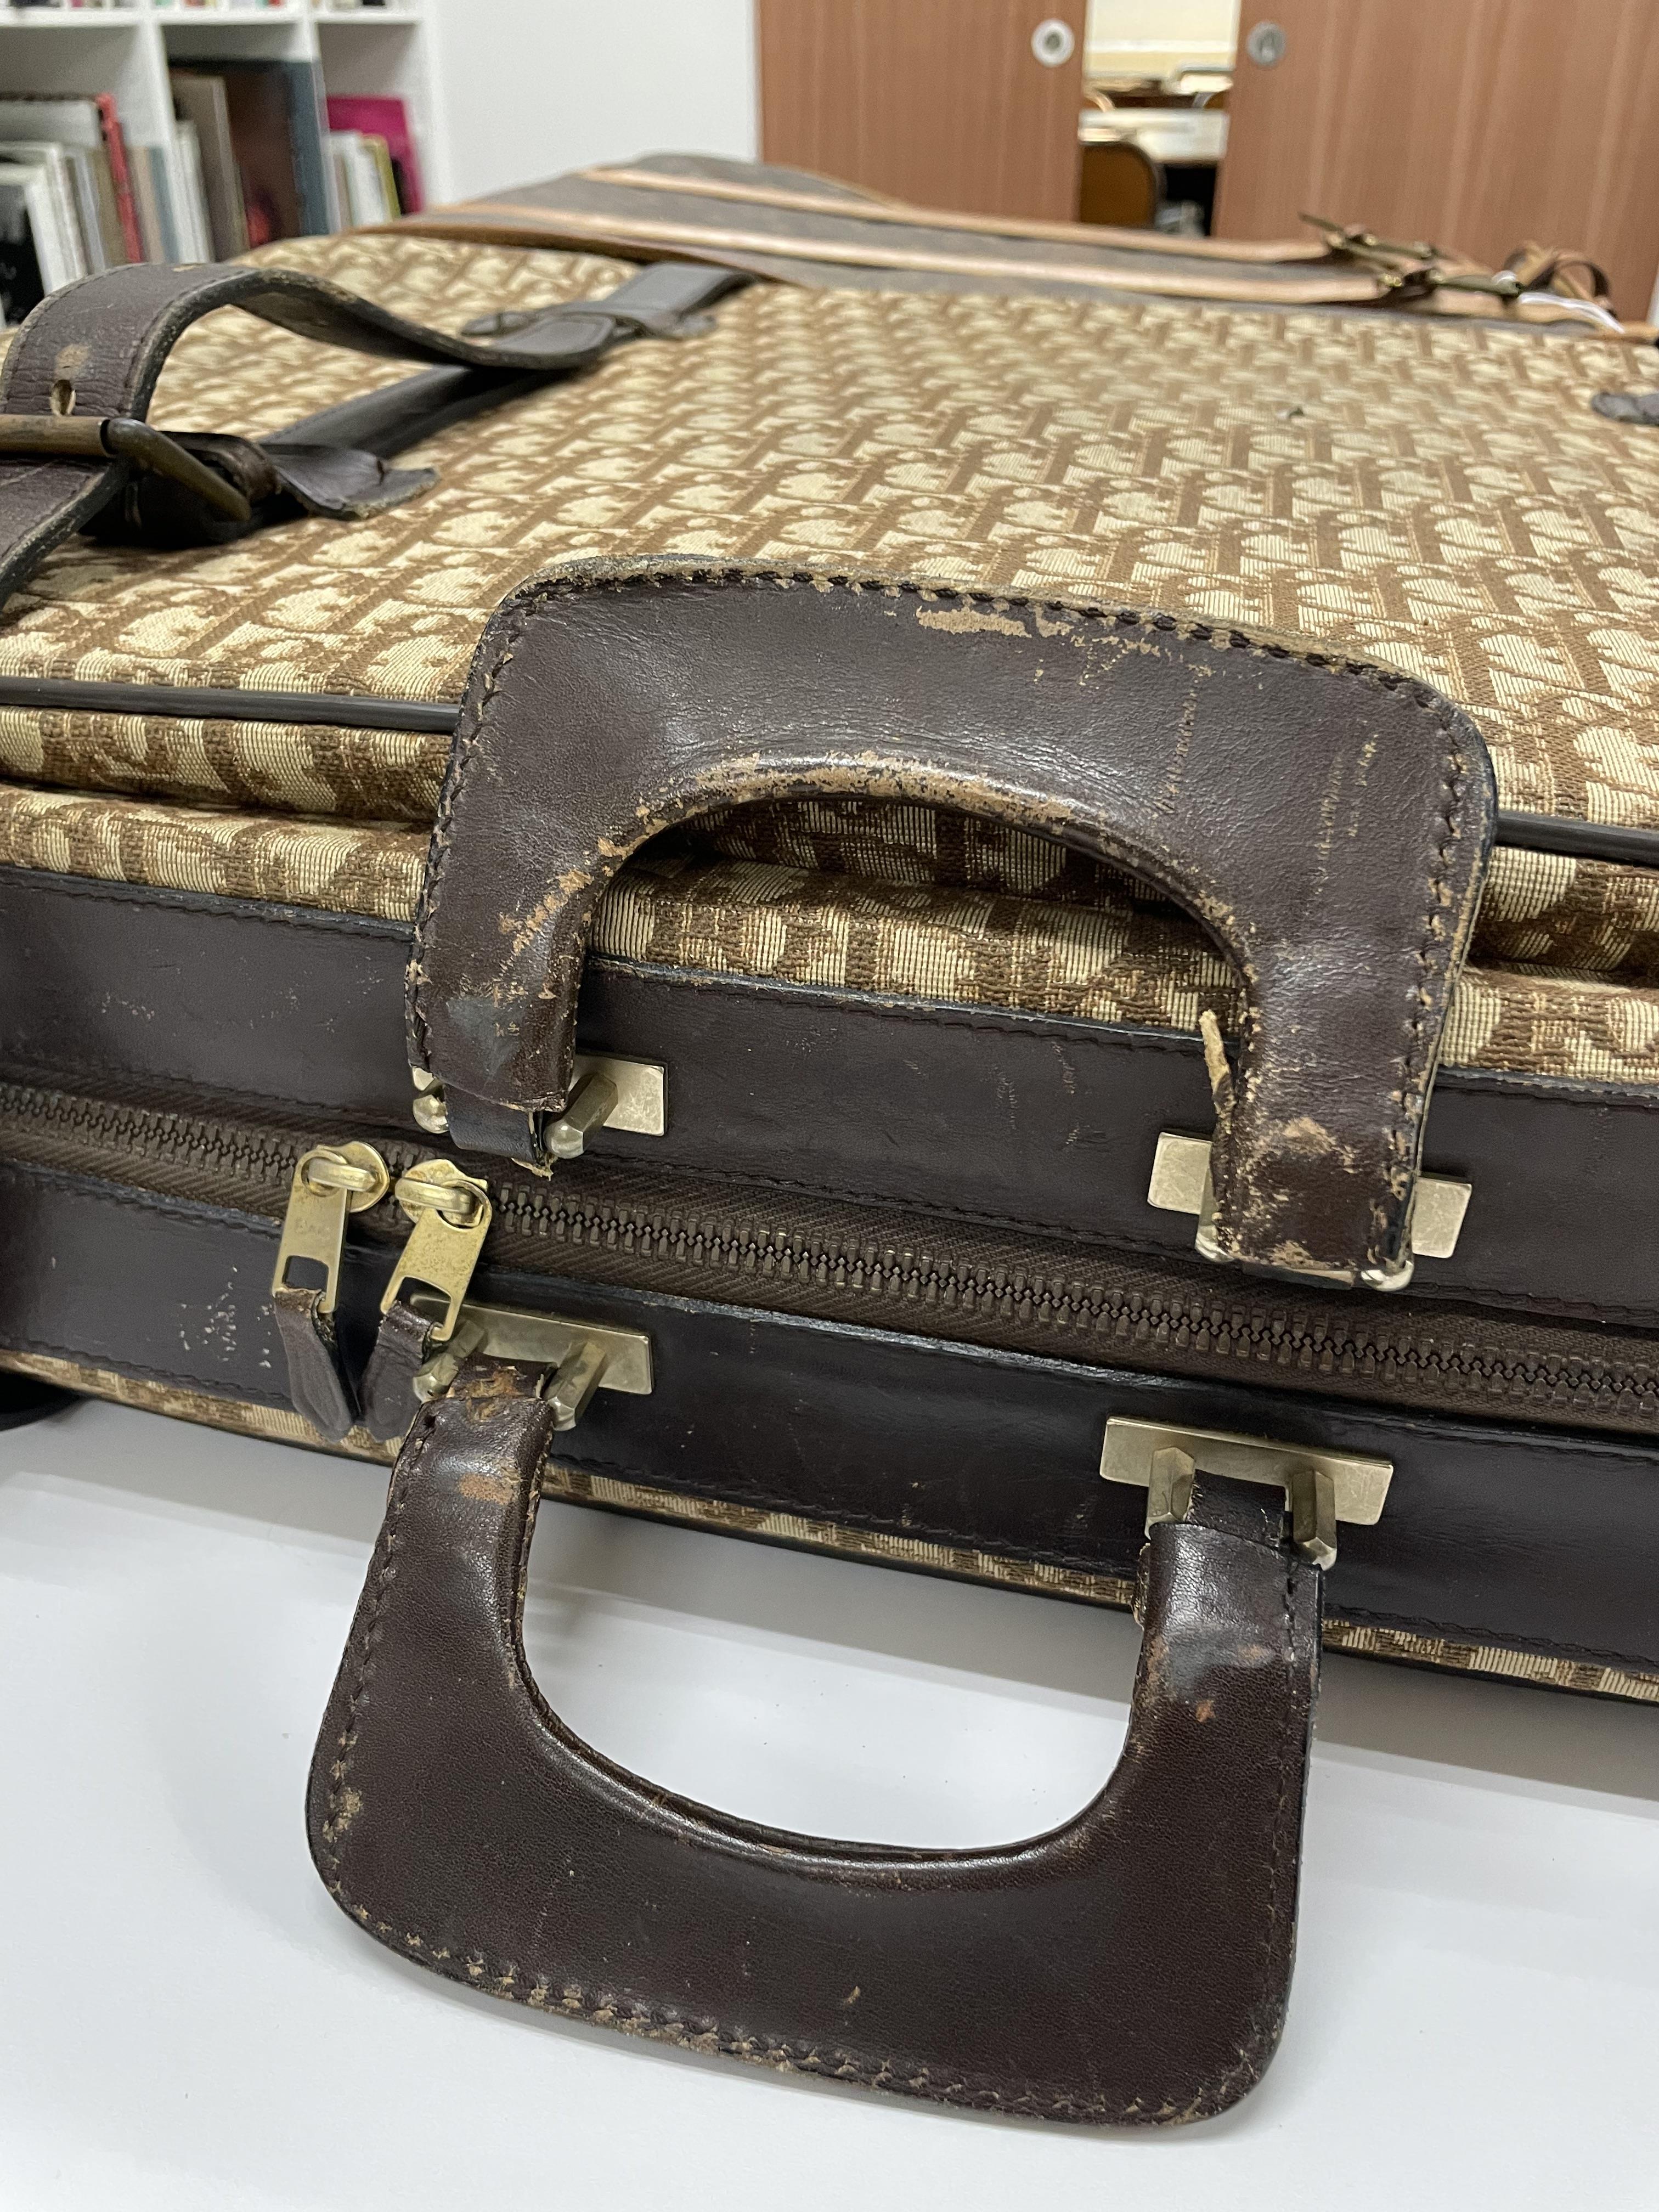 A GRADUATED SET OF TWO VINTAGE CHRISTIAN DIOR SUITCASES - Image 8 of 14